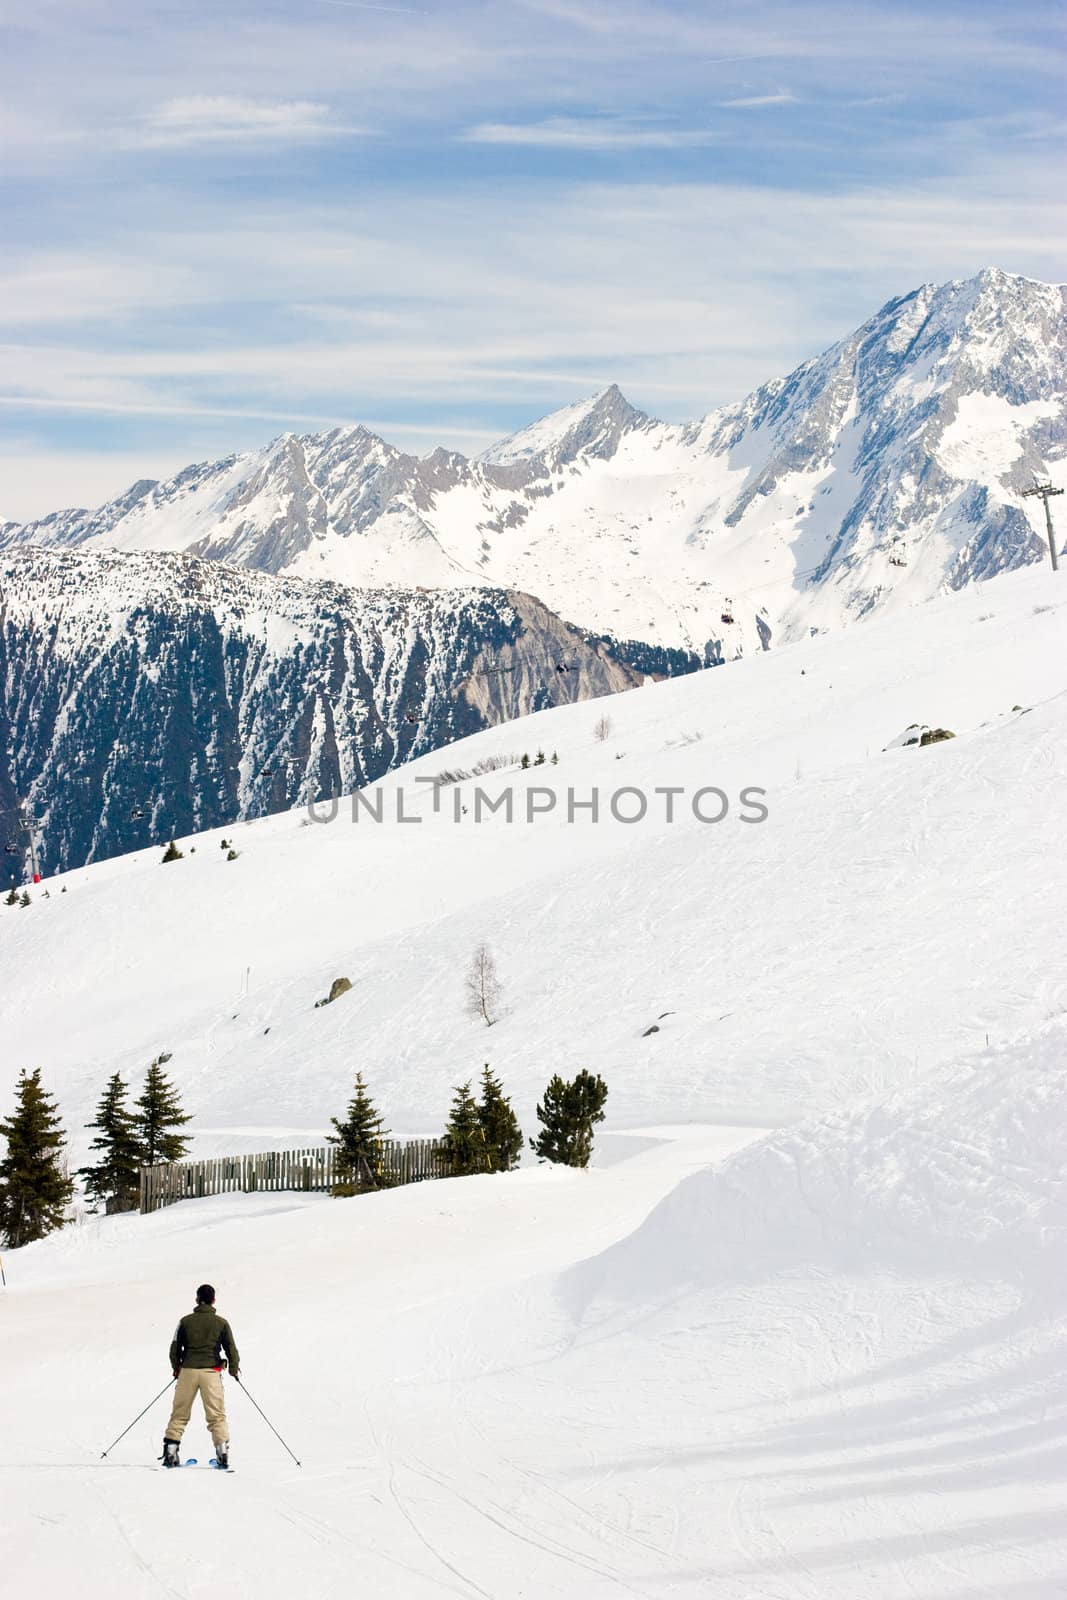 Skier at the track by naumoid